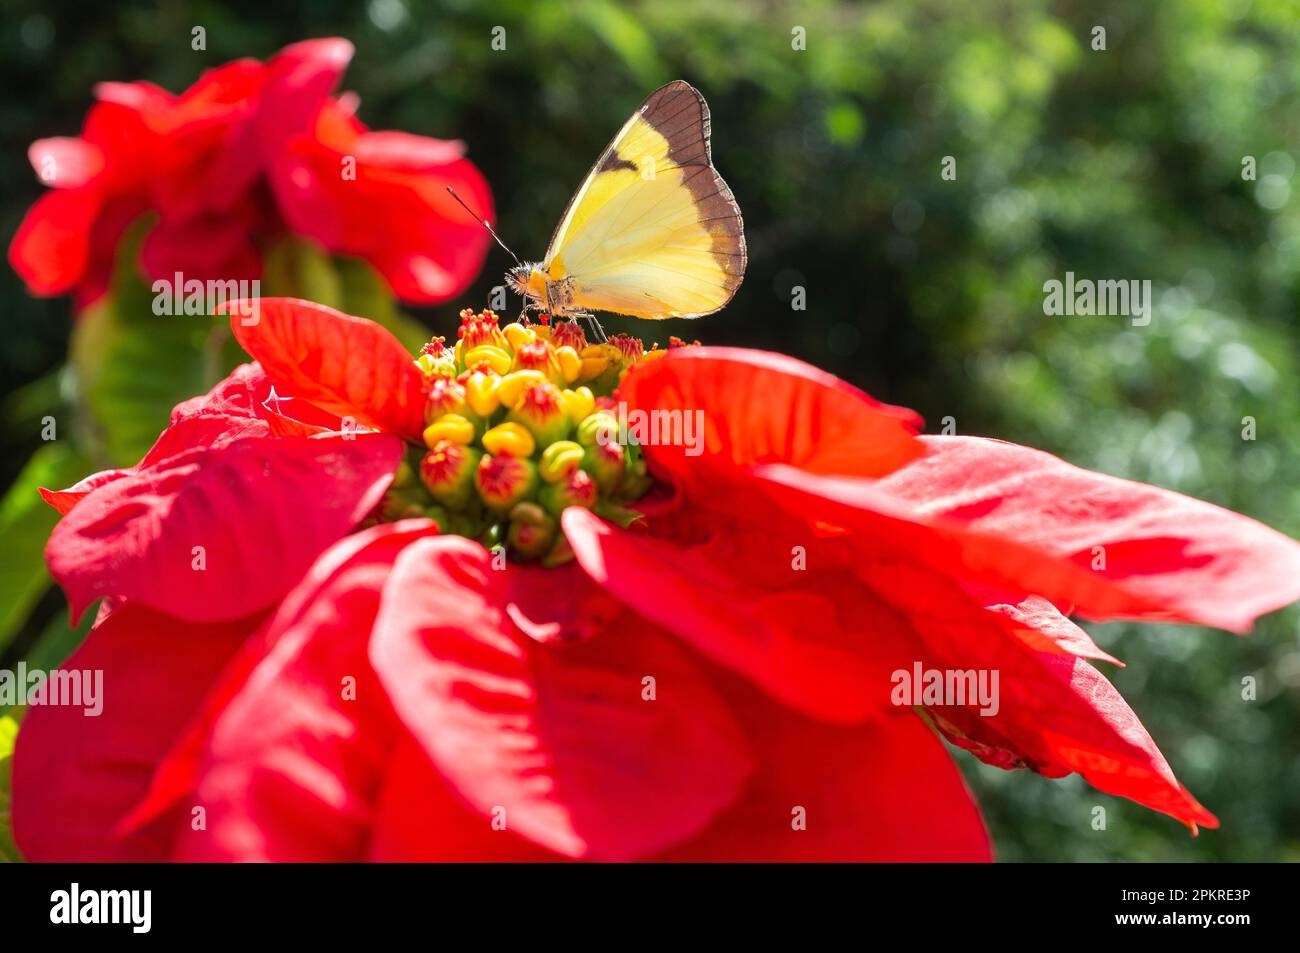 A yellow buttefly feeding on a red flower - butterflies are important as pollinators for some species of plants, because they are capable of moving pollen over great distances. Nova Friburgo, Rio de Janeiro State, Brazil. Stock Photo